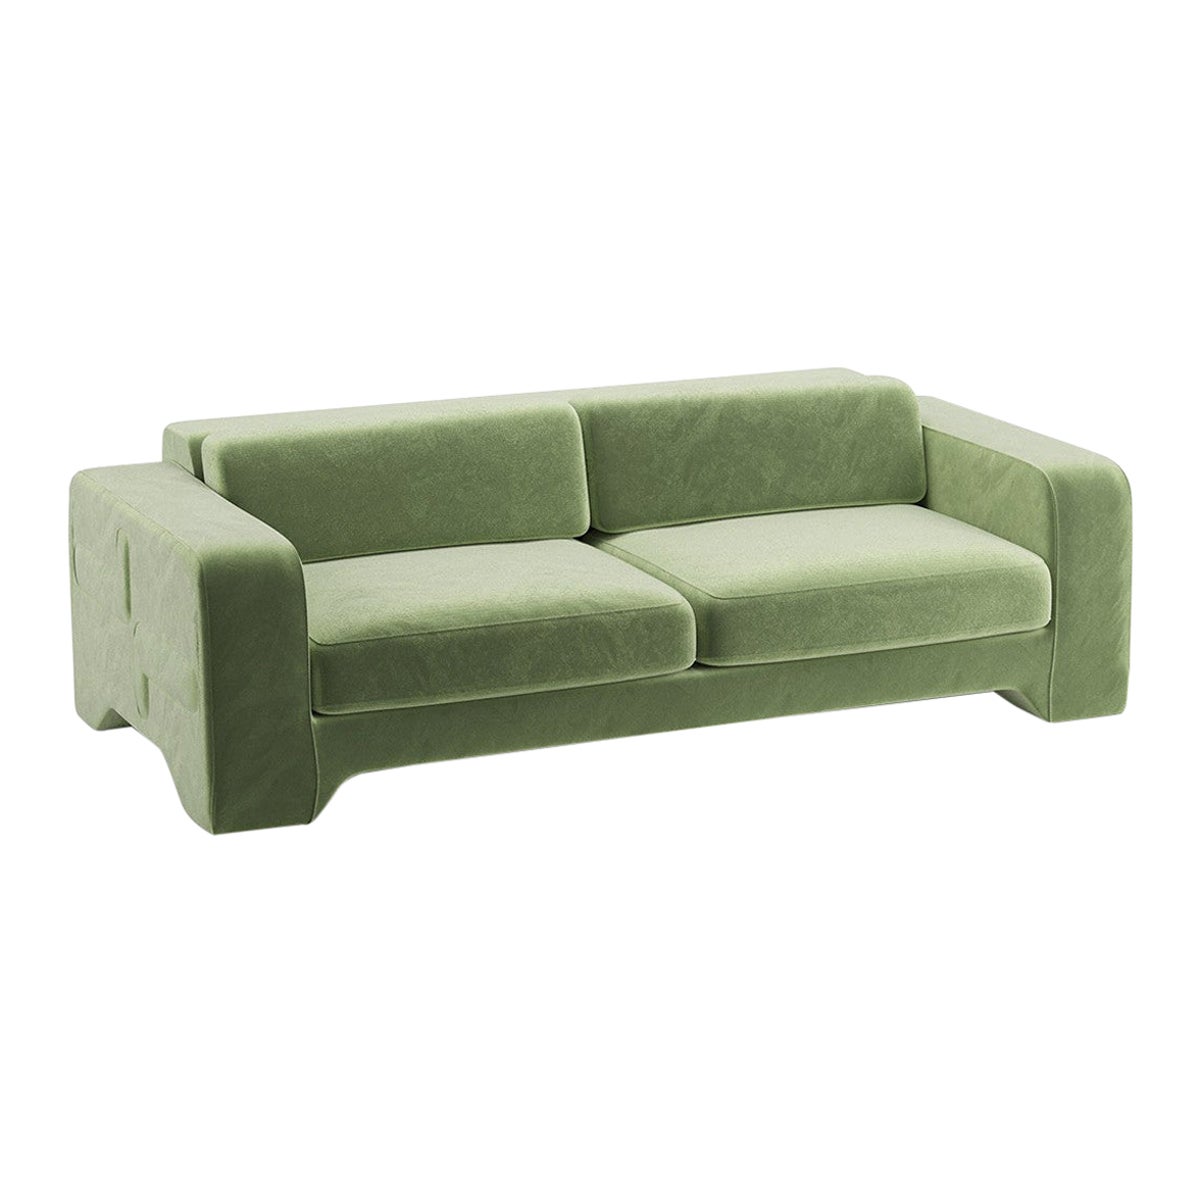 Popus Editions Giovanna 2.5 Seater Sofa in Green Verone Velvet Upholstery For Sale